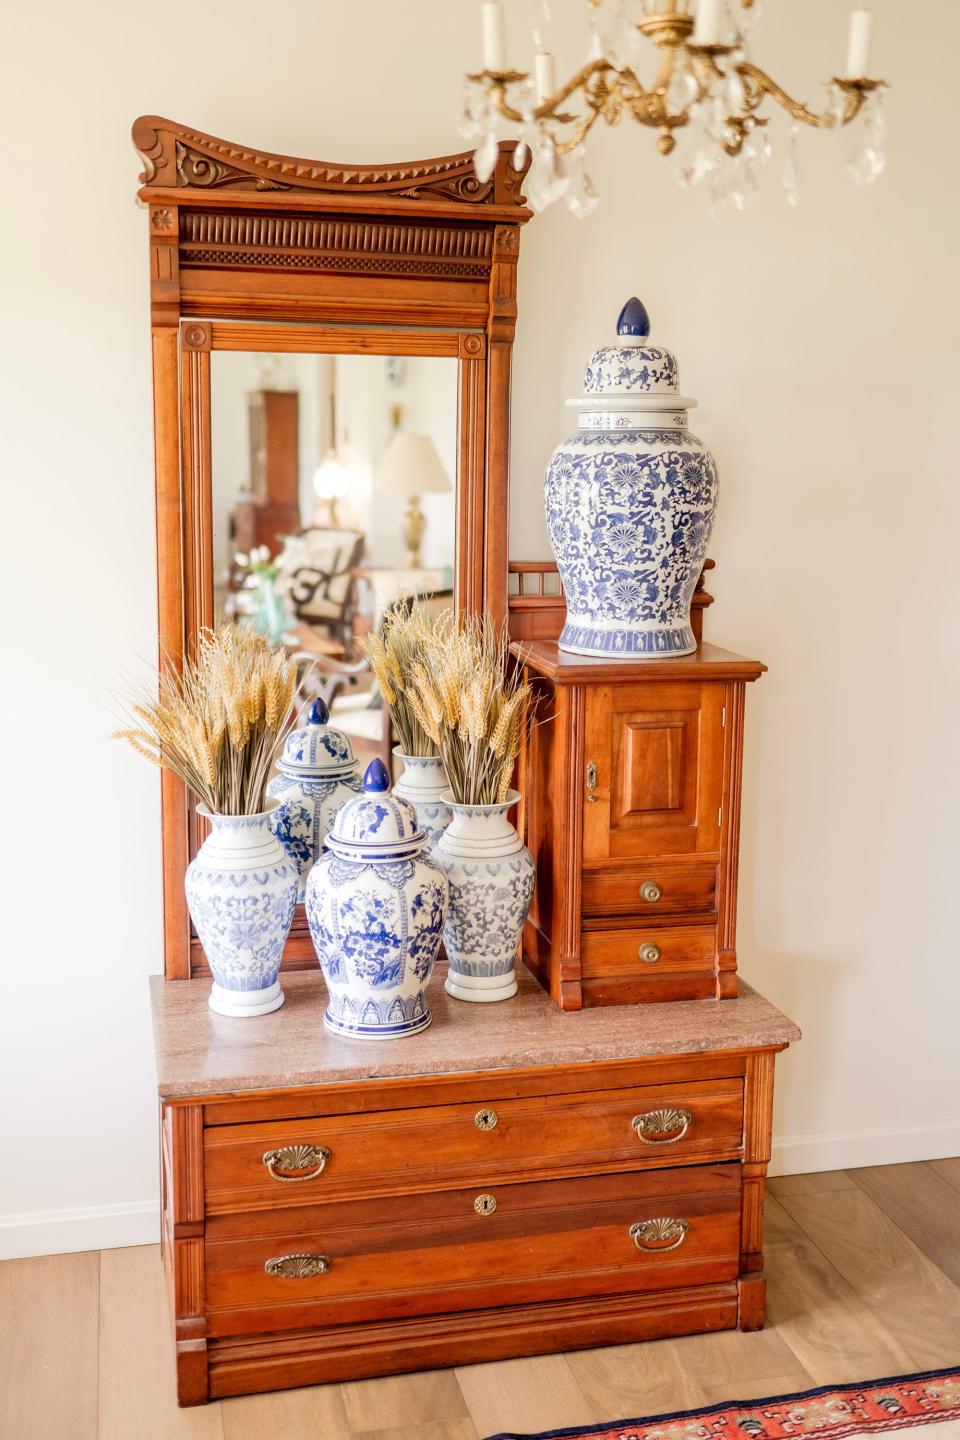 This unique, ornate piece sits in the foyer of this Russell Springs, Kentucky home. It features Asian-made porcelain atop marble surfaces.